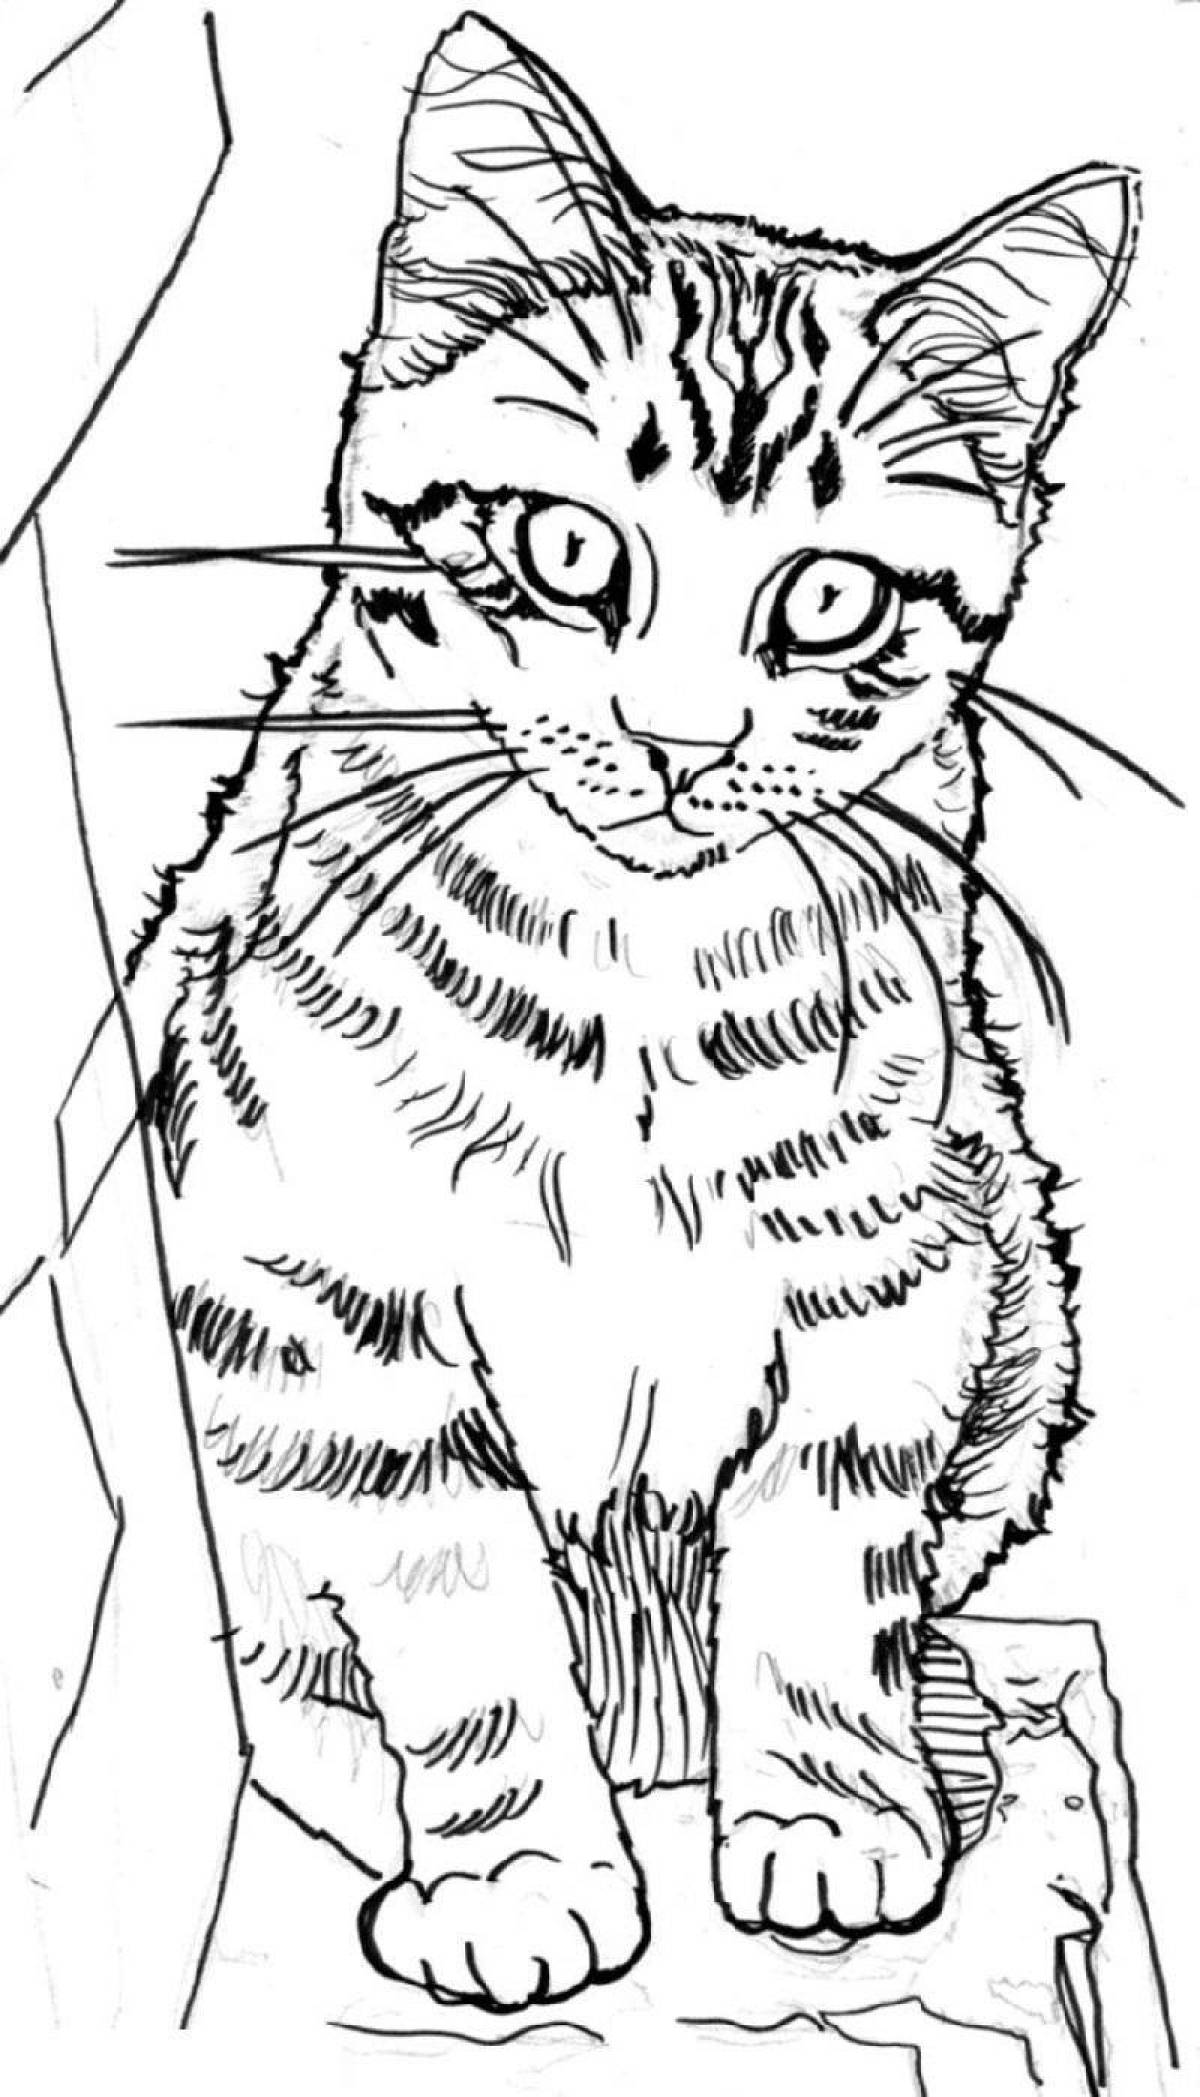 Wiggly tabby kitten coloring page